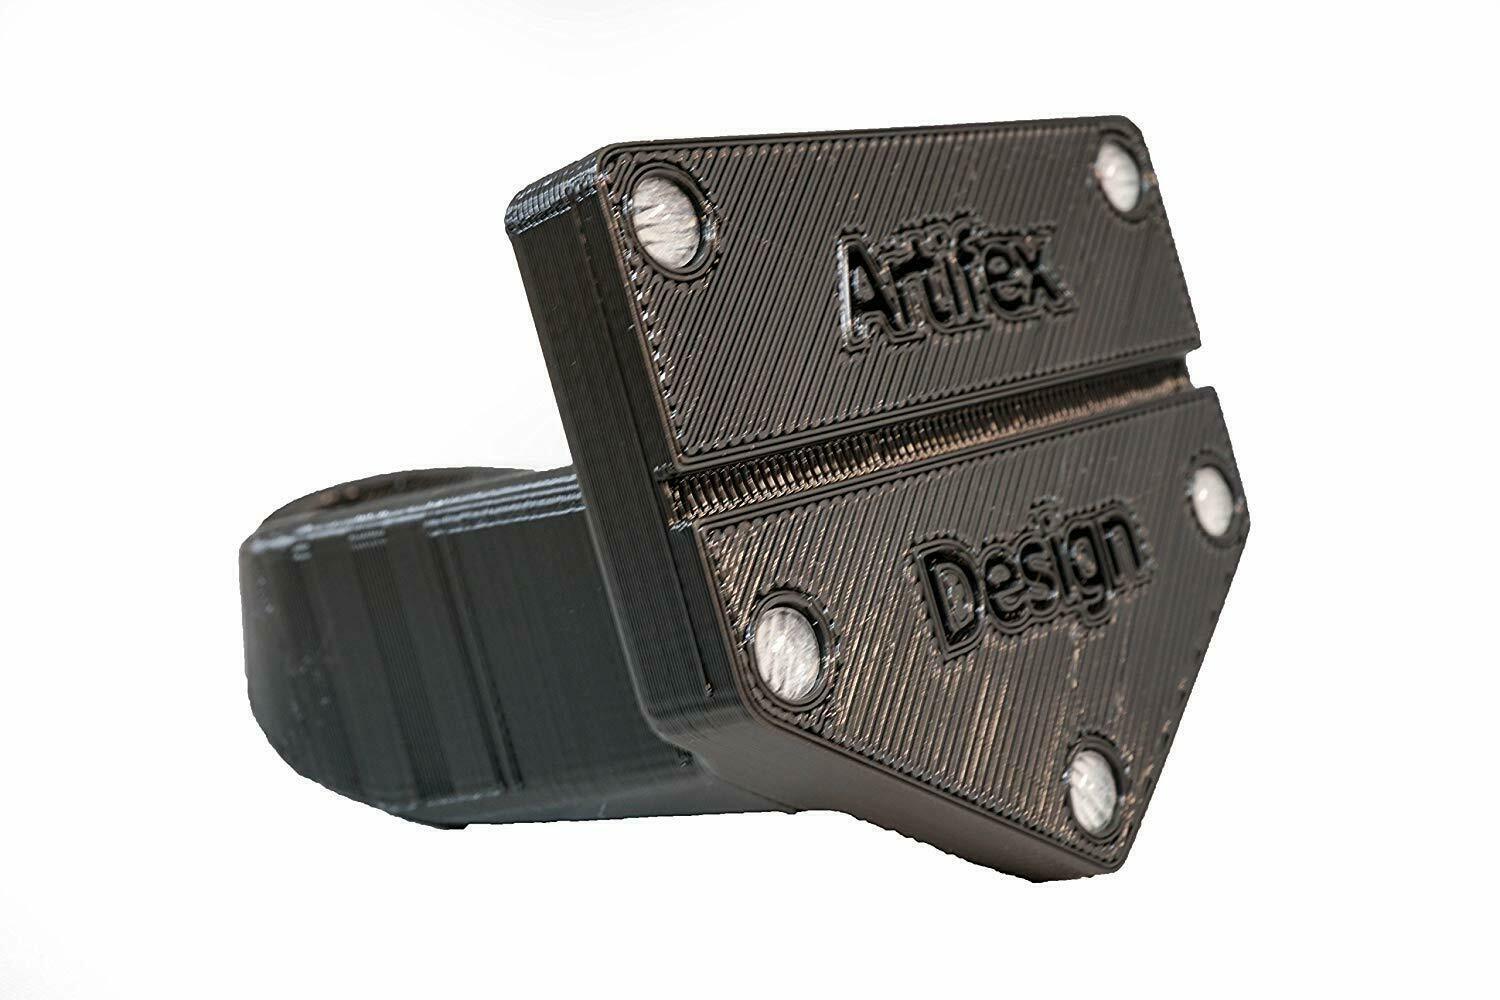 Artifex Design Stand Configured for 3rd Generation TAG Heuer Connected 2020 (Includes USB Cable) - Artifex Design 3D